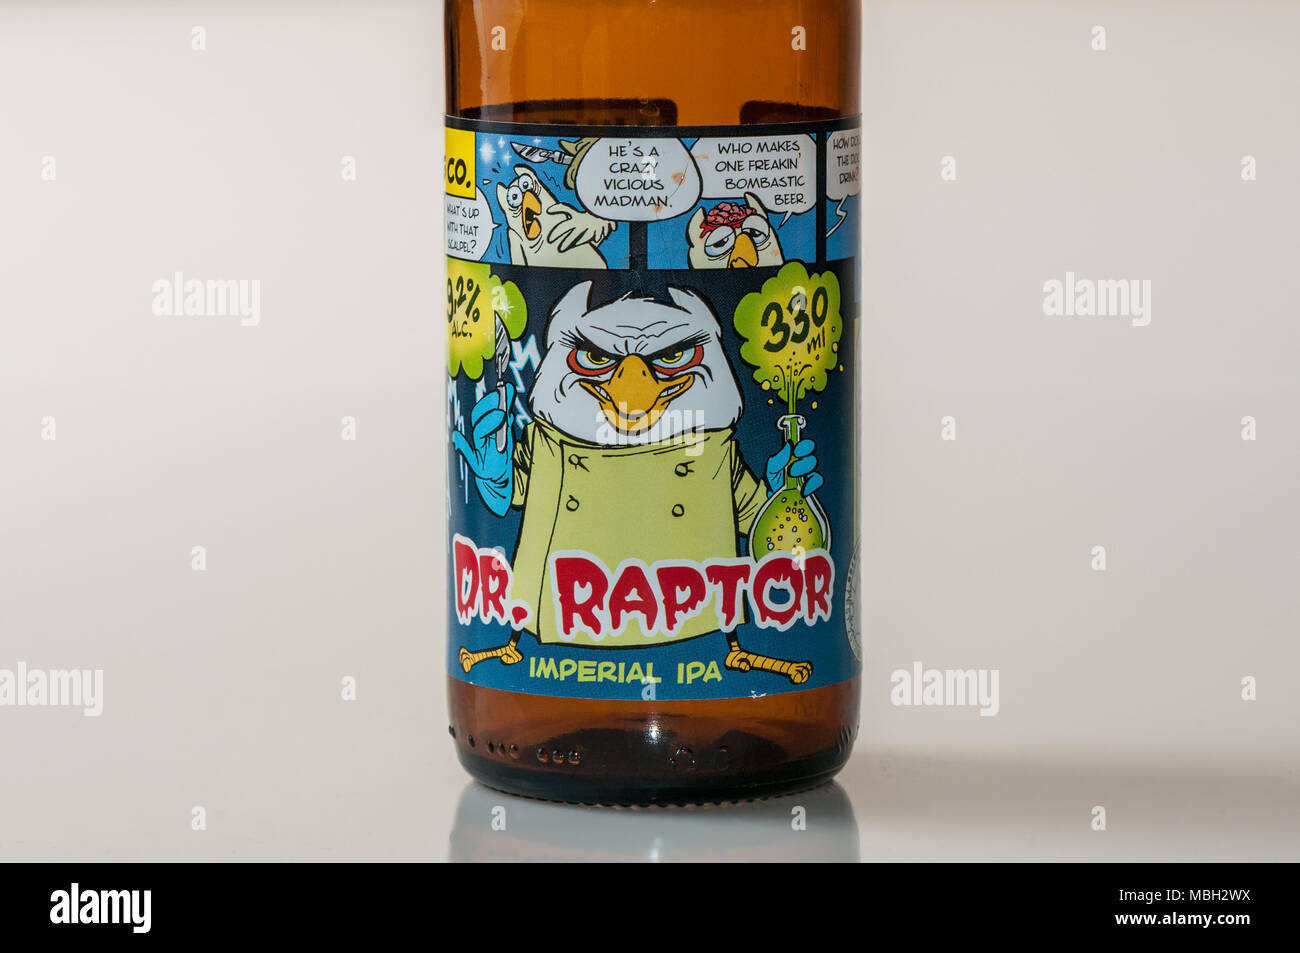 beer glass bottle, imperial IPA, Dr. Raptor, Uiltje Brewing Co. Stock Photo